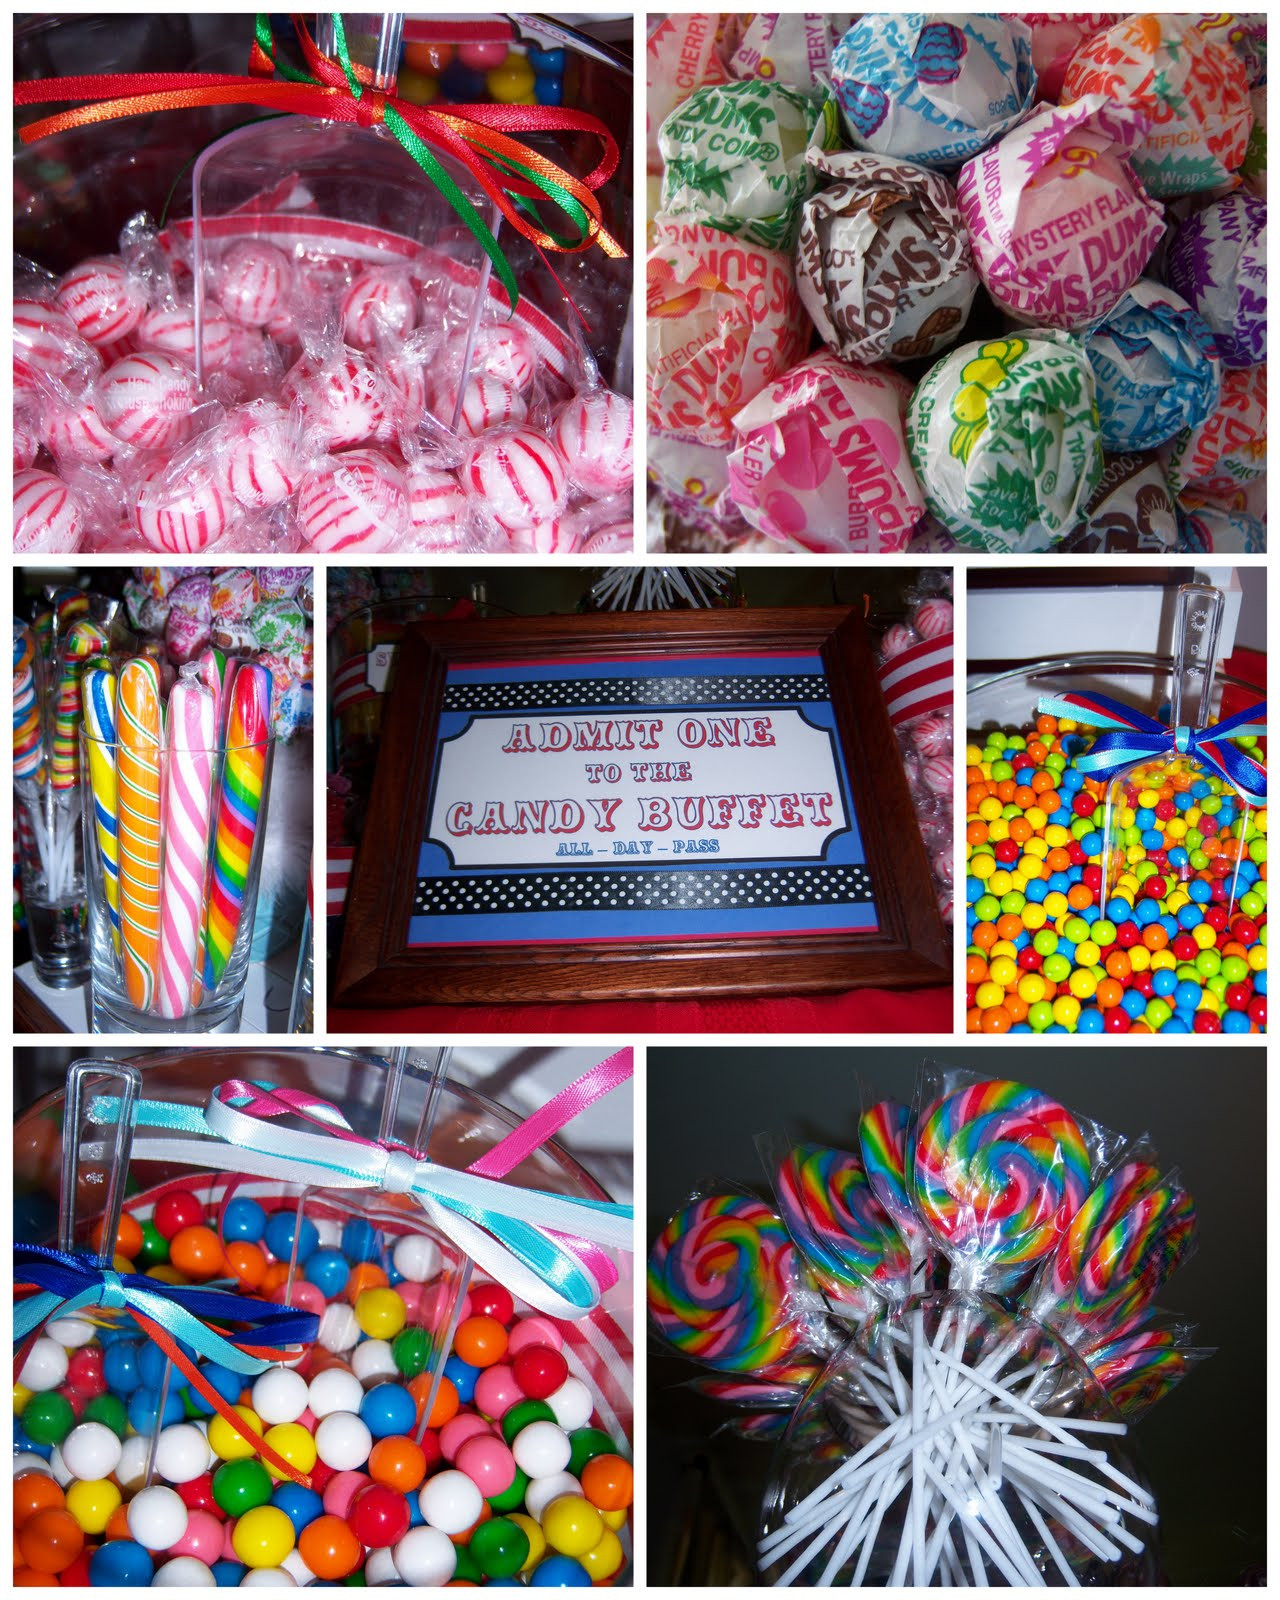 Carnival Themed Graduation Party Ideas
 Party Simple Carnival Themed Graduation Party